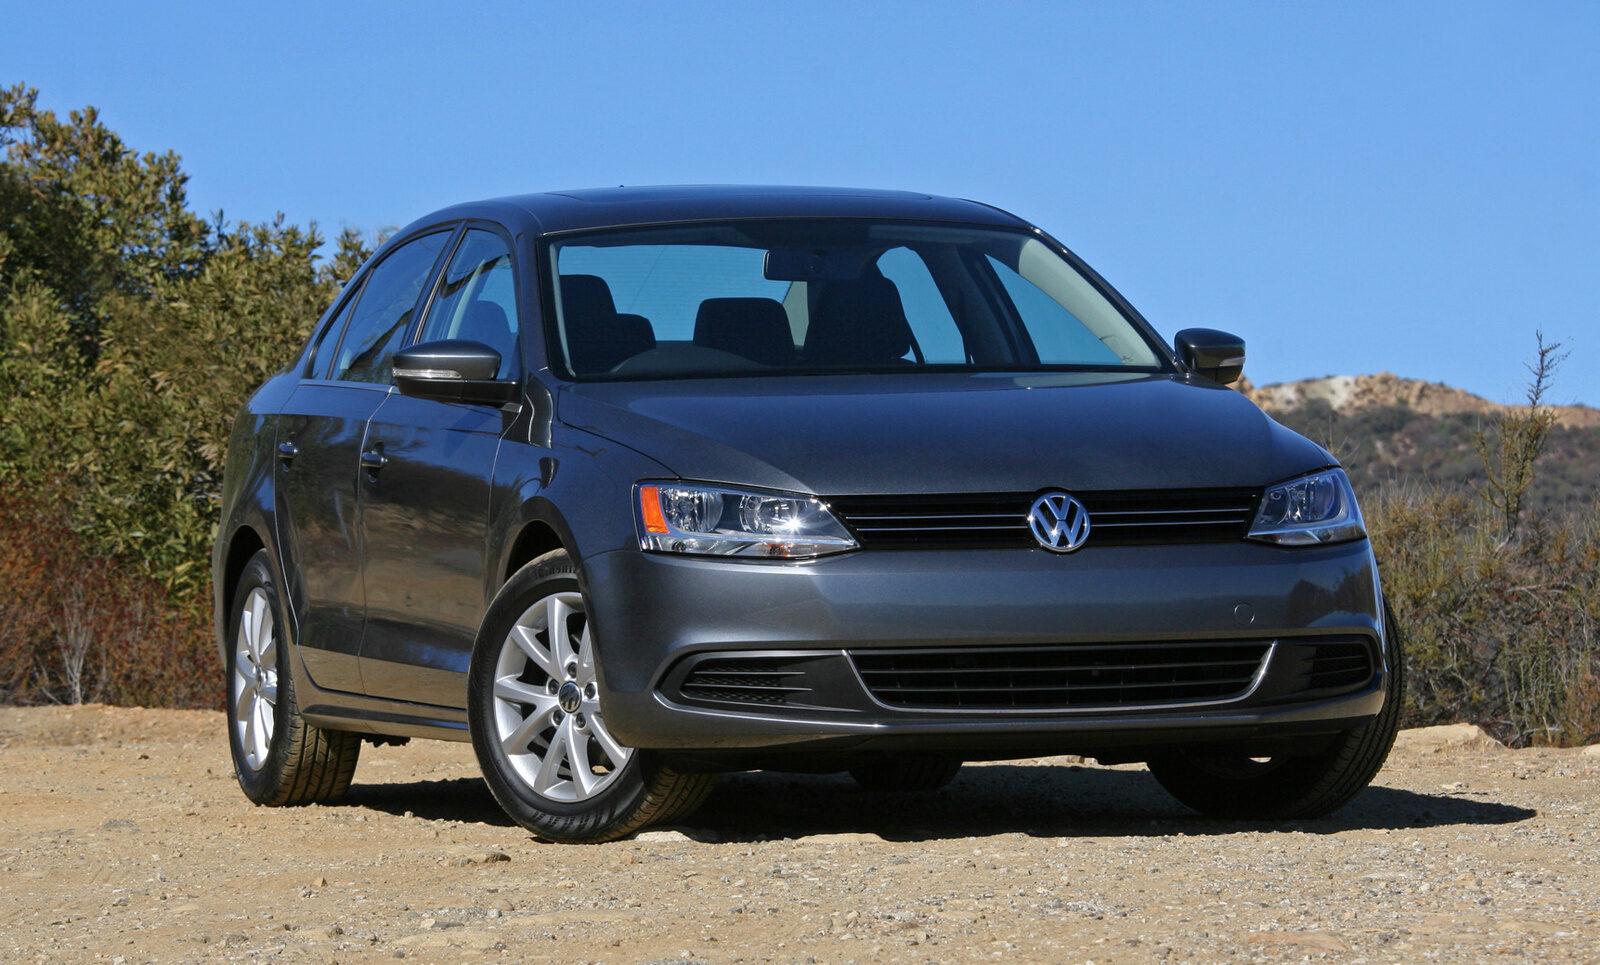 P05A0 Code Explained: Diagnosing the Volkswagen Jetta's Electrical System